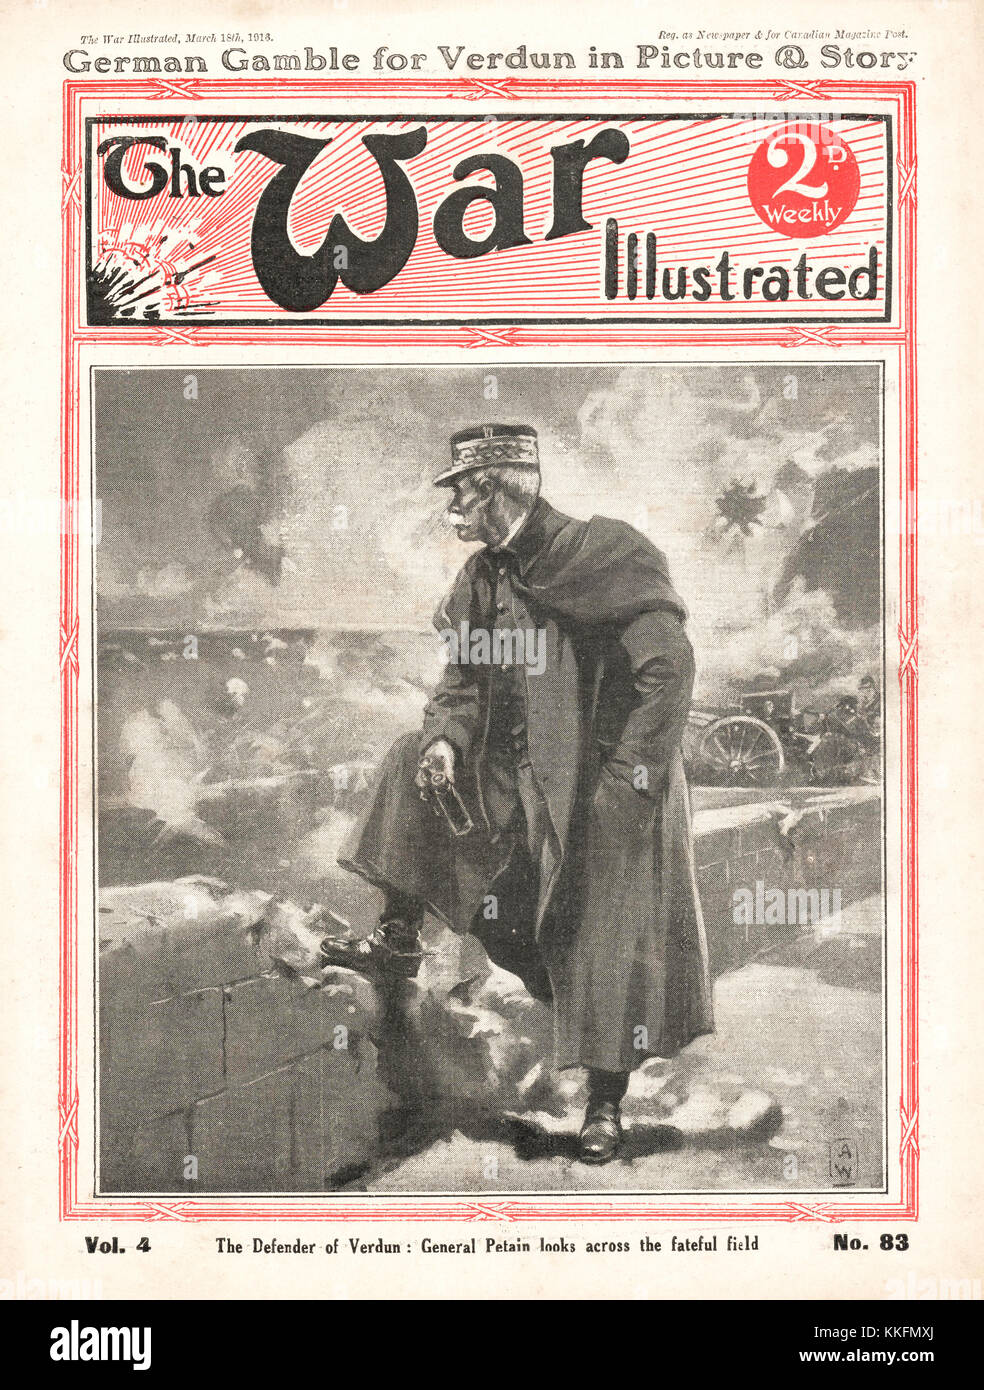 1916 War Illustrated General Petain on Western Front Stock Photo